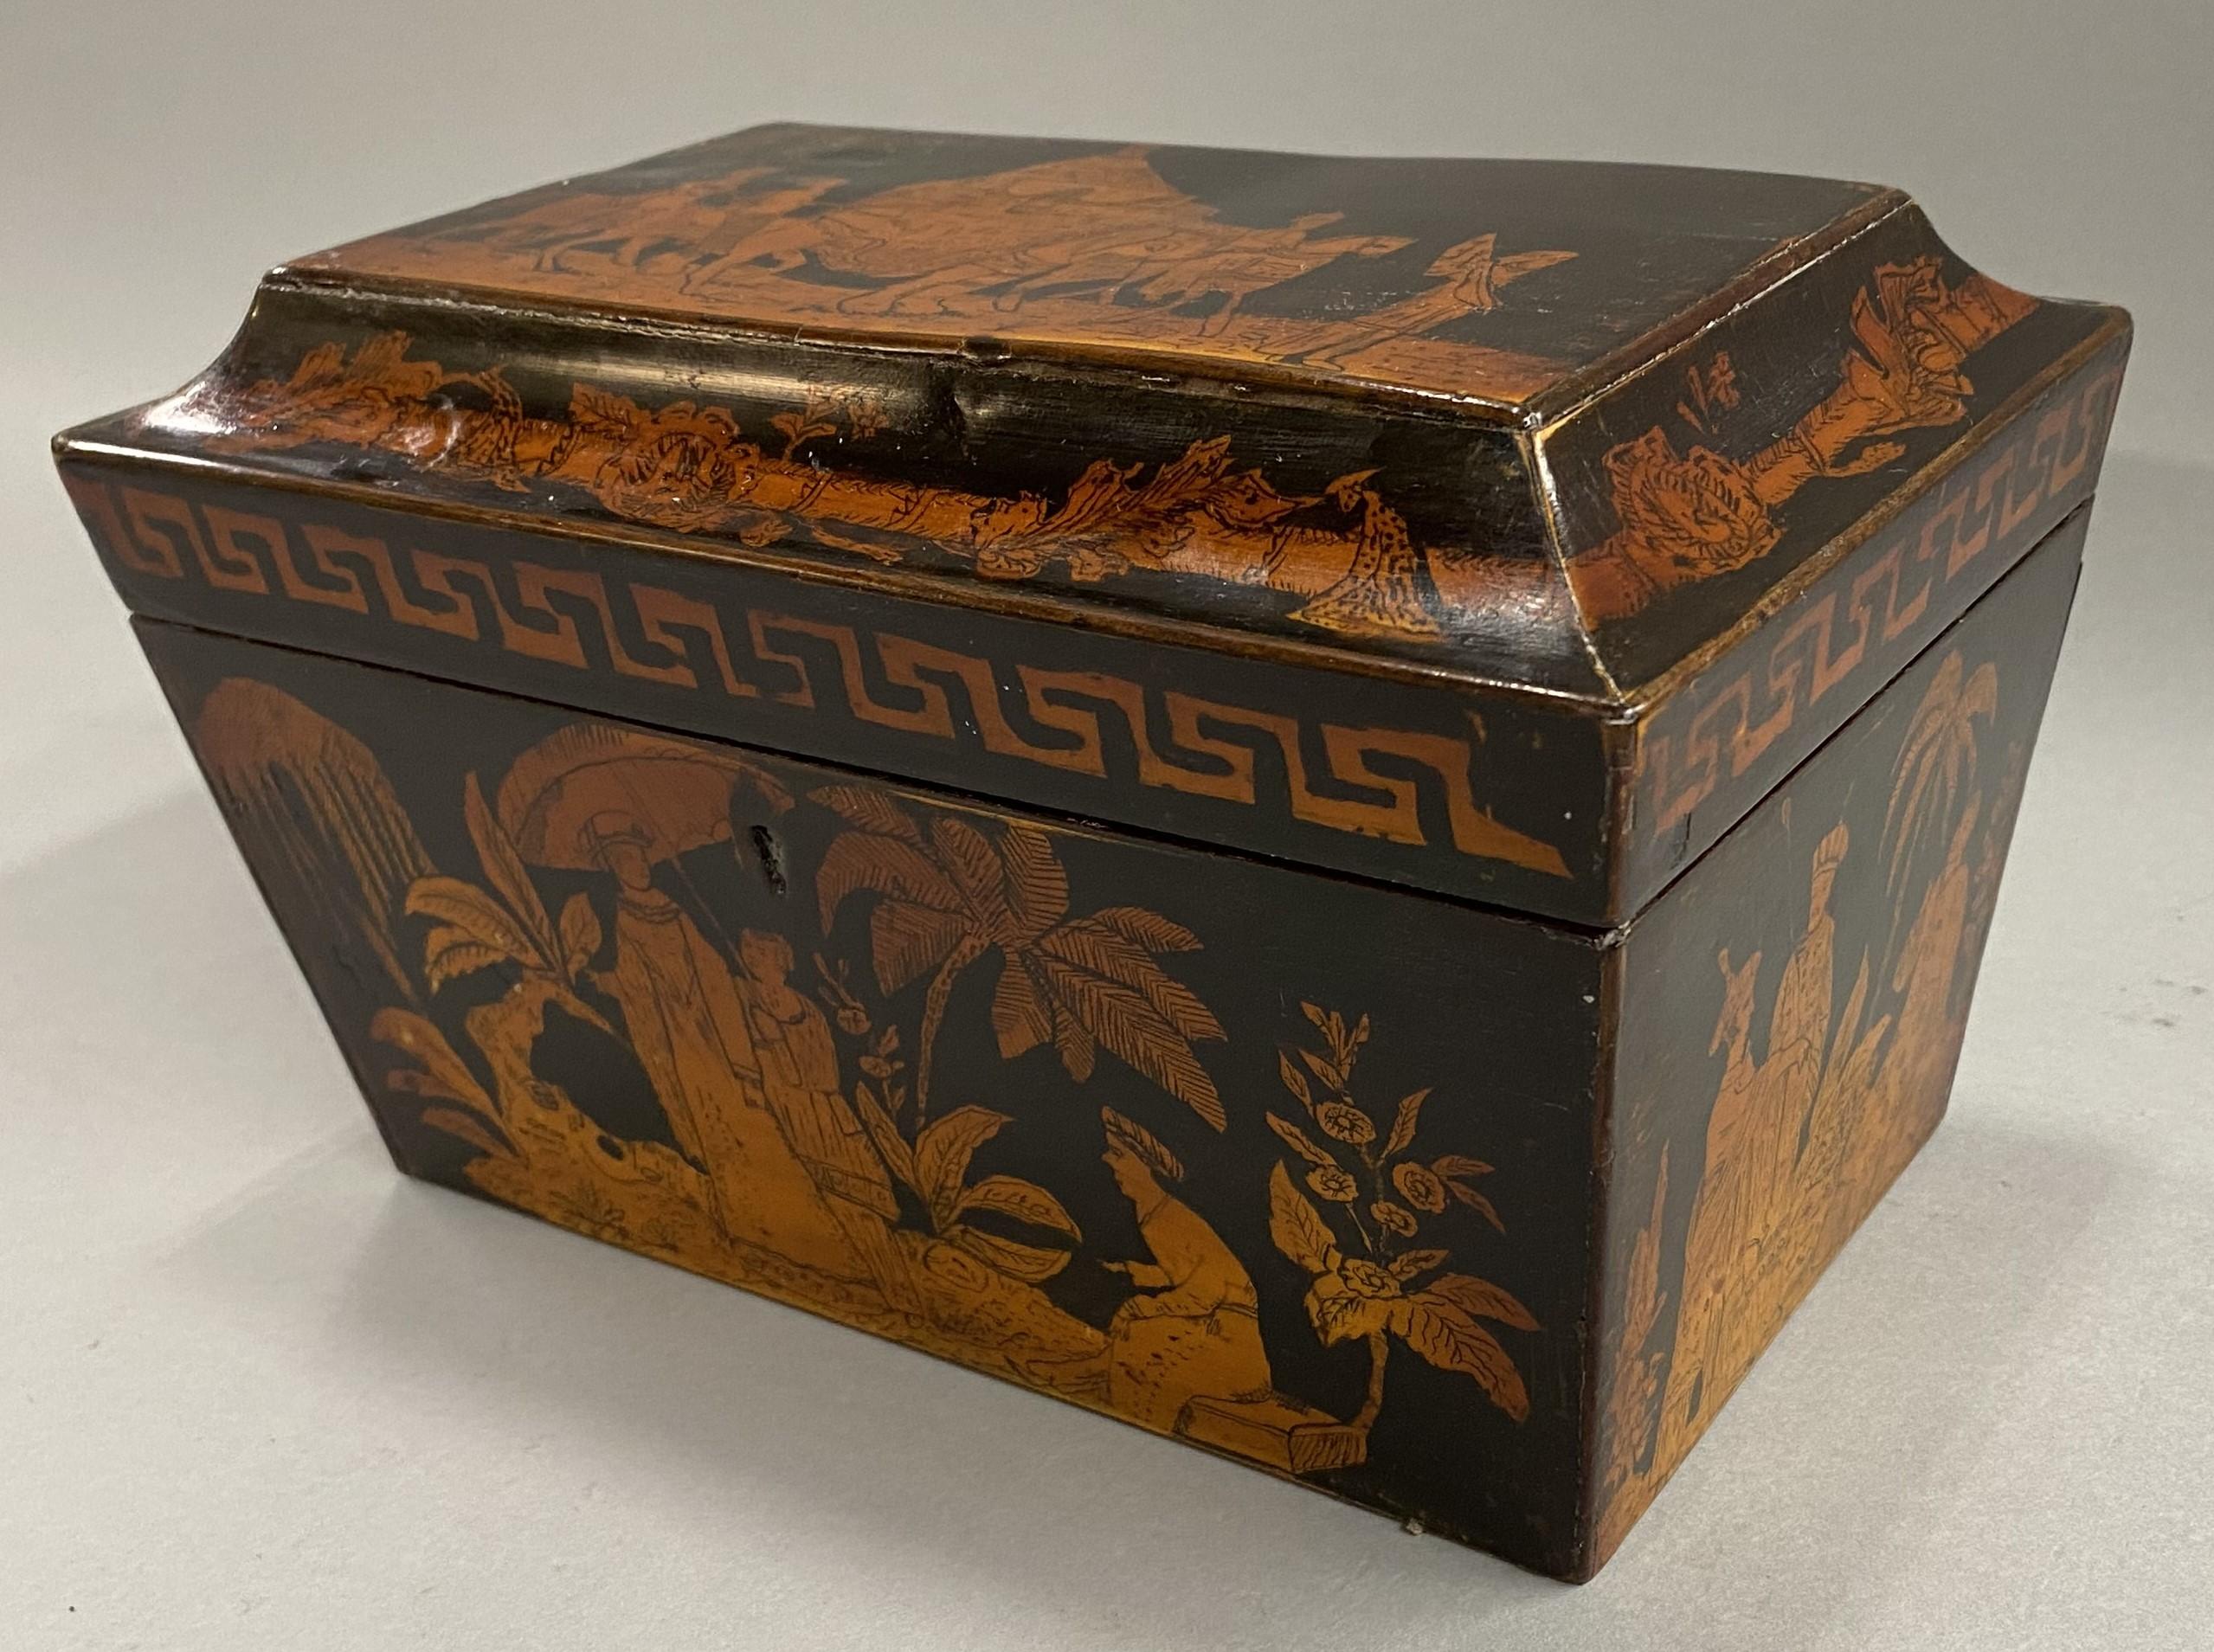 A fine Regency penwork rectangular tea caddy in the Chinoiserie taste with lacquered surface, foliate and figural decoration on all sides, including the interior, with an elephant handler on the hinged lid. The two interior tea compartments are foil